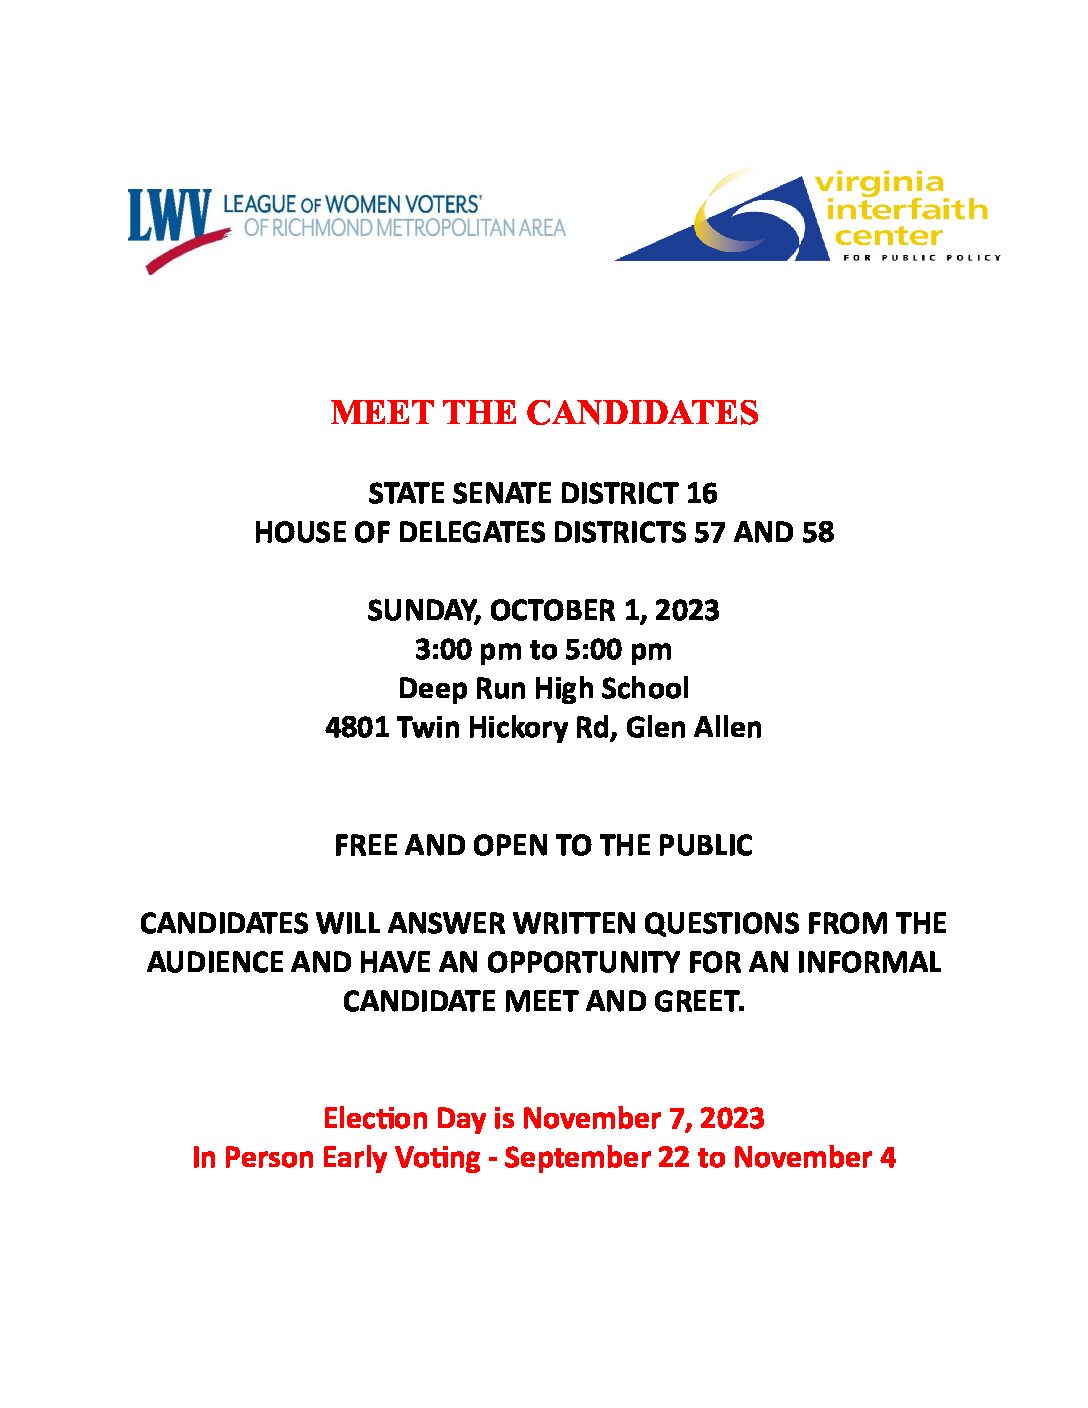 Henrico Candidate “Meet and Greet”